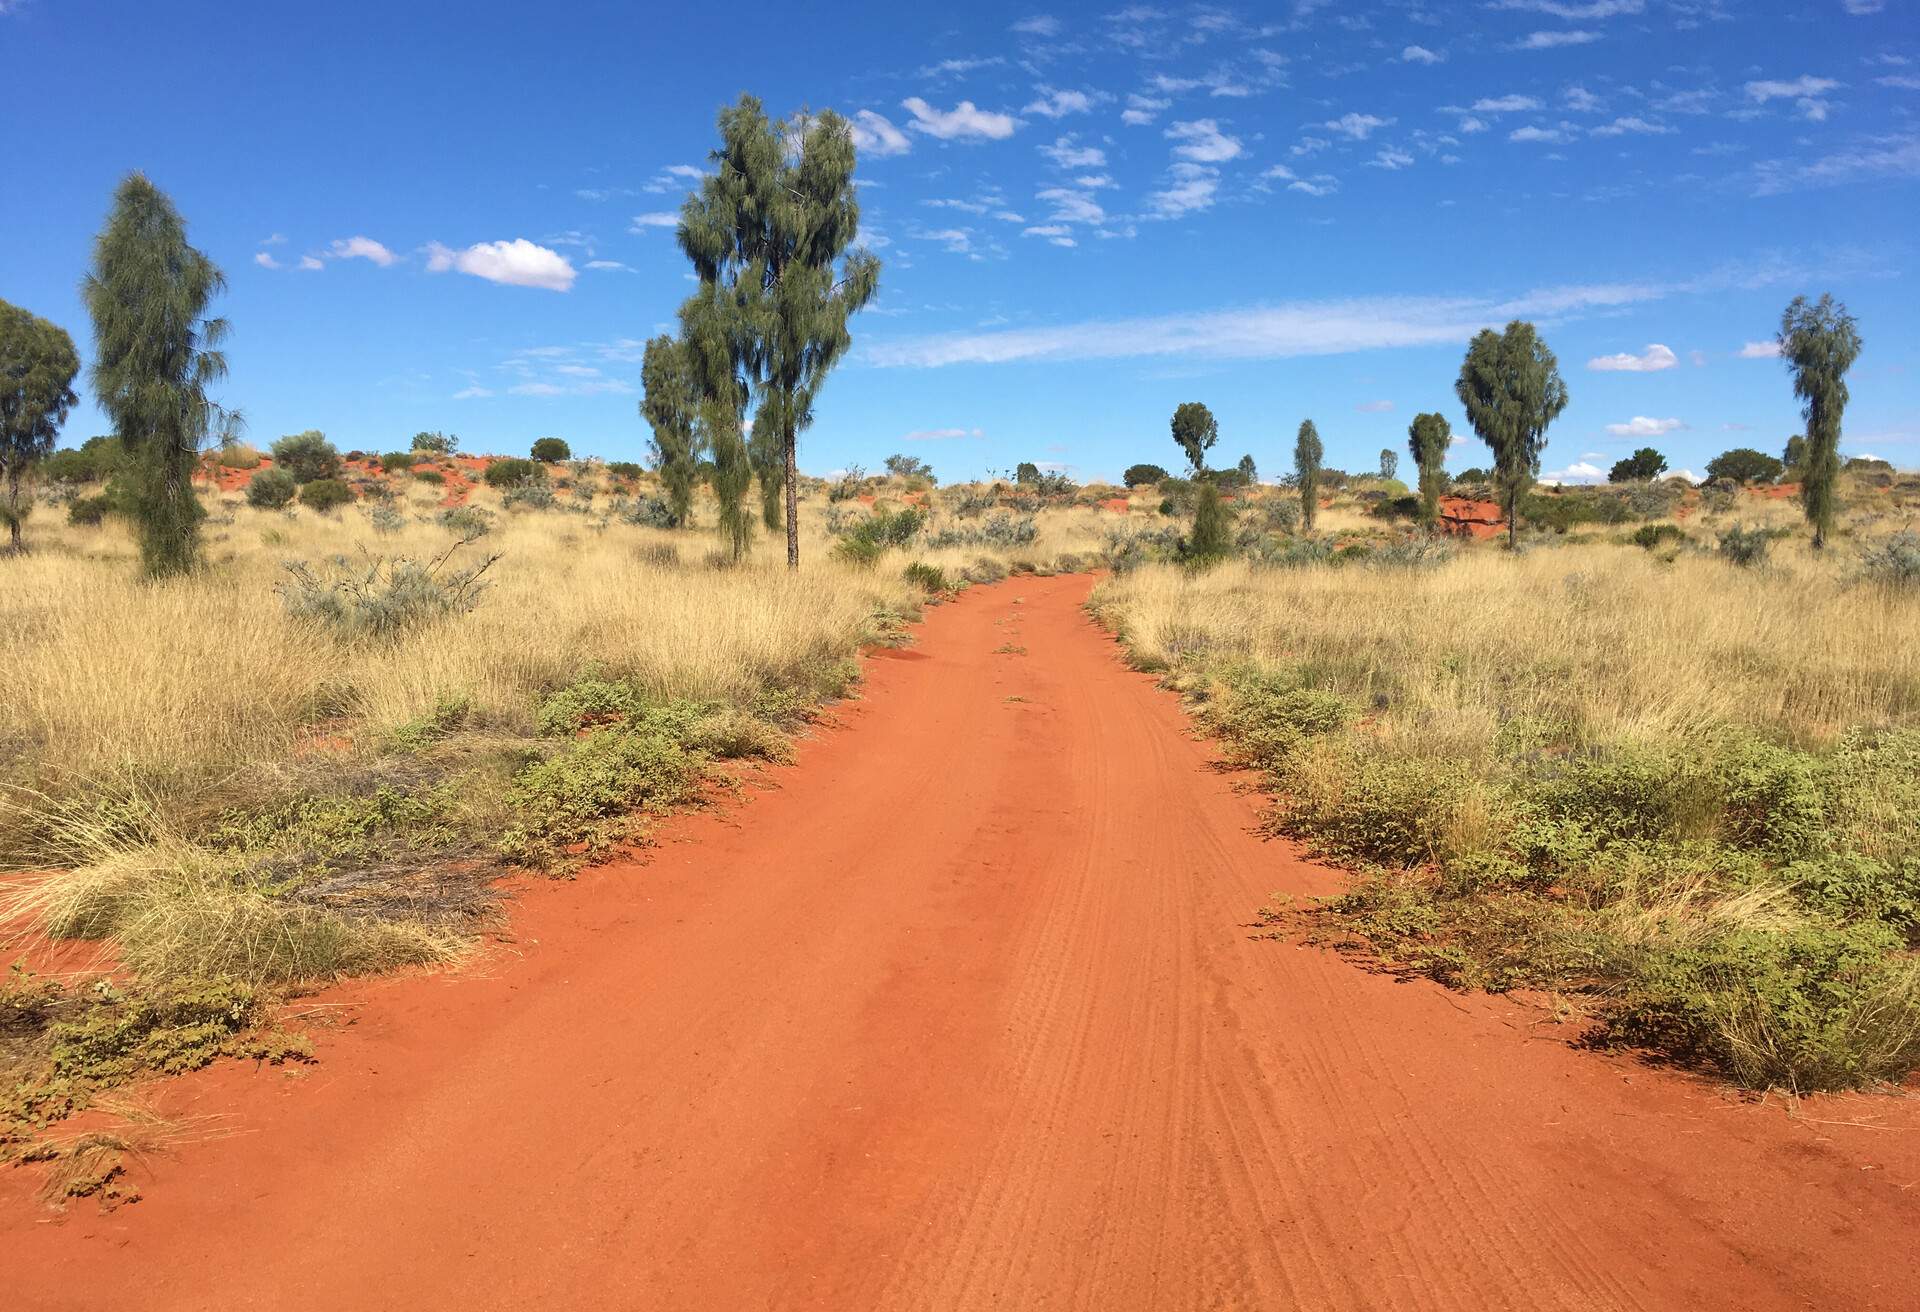 The Red Dirt Roads of The Australian Outback